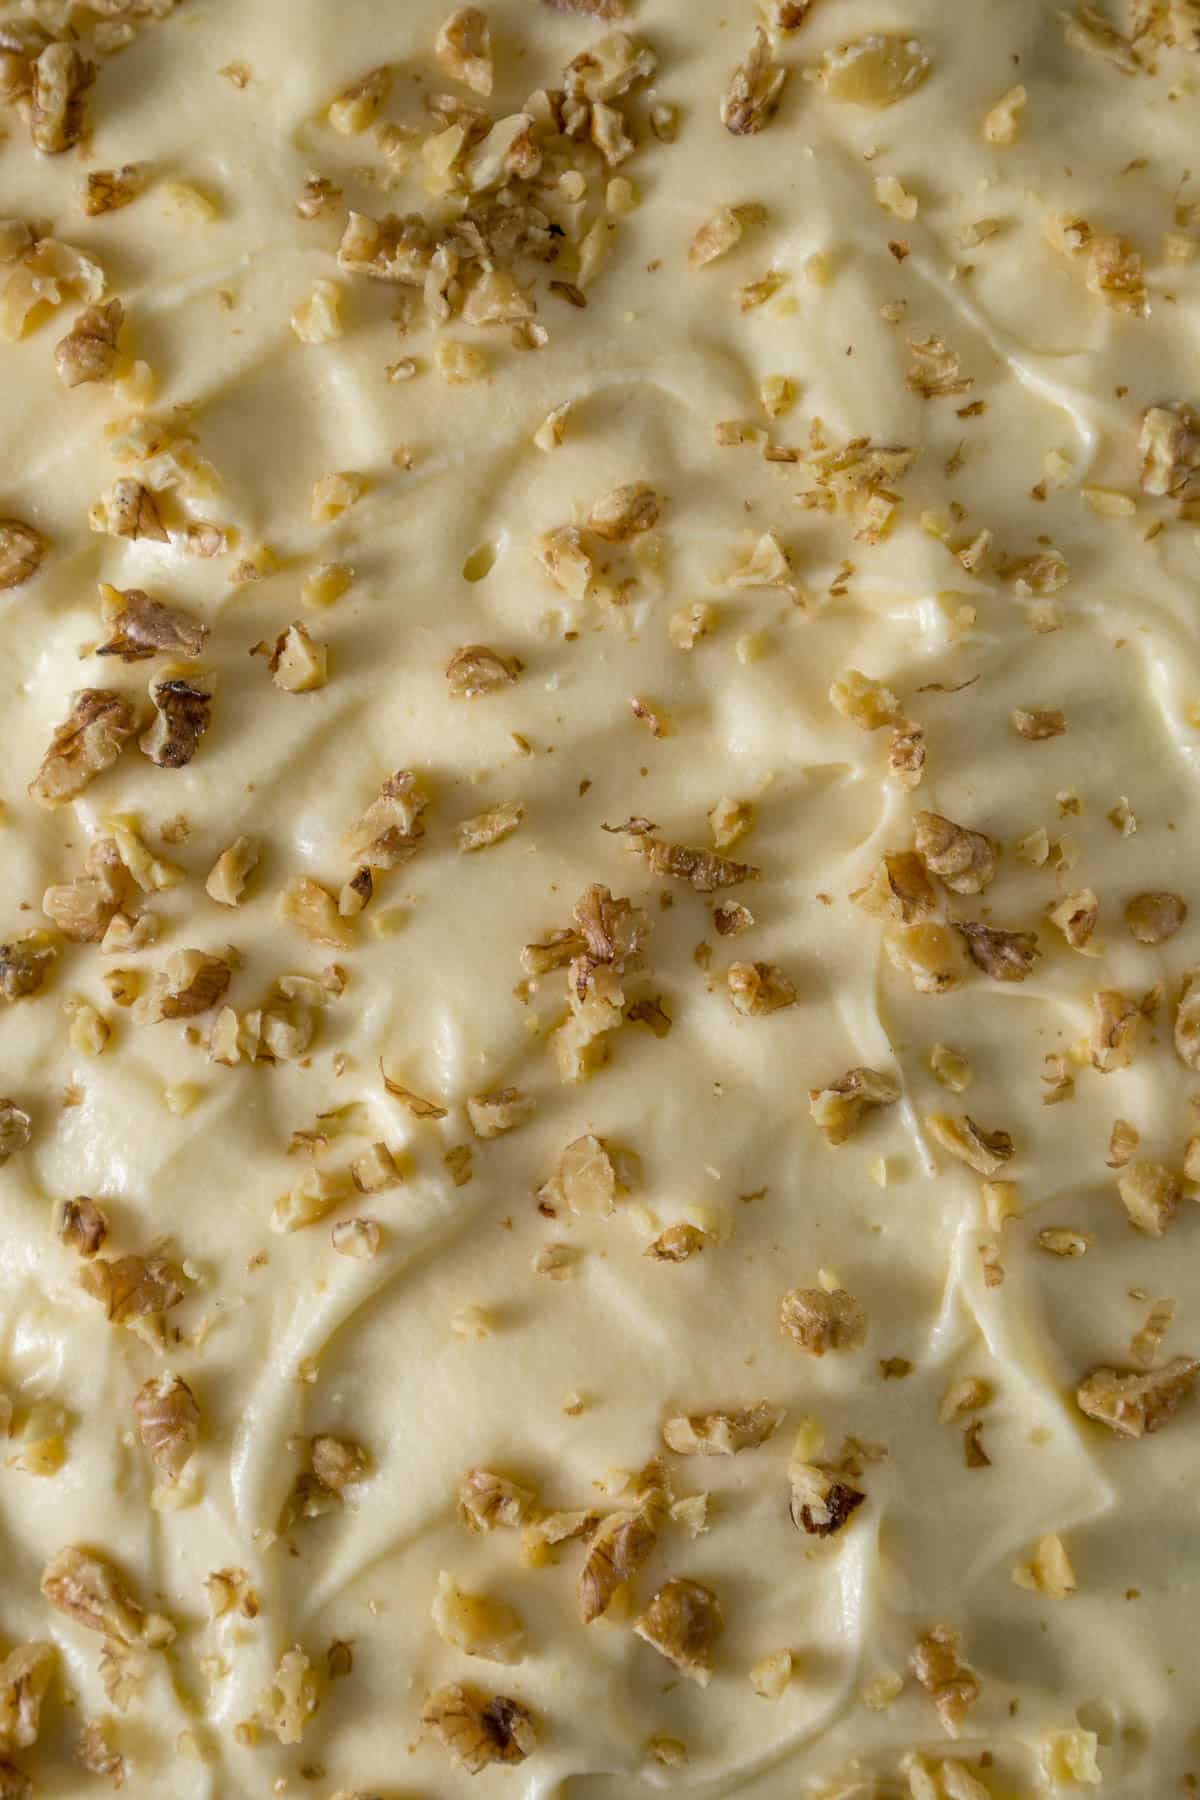 Cream cheese frosting sprinkled with walnut pieces.